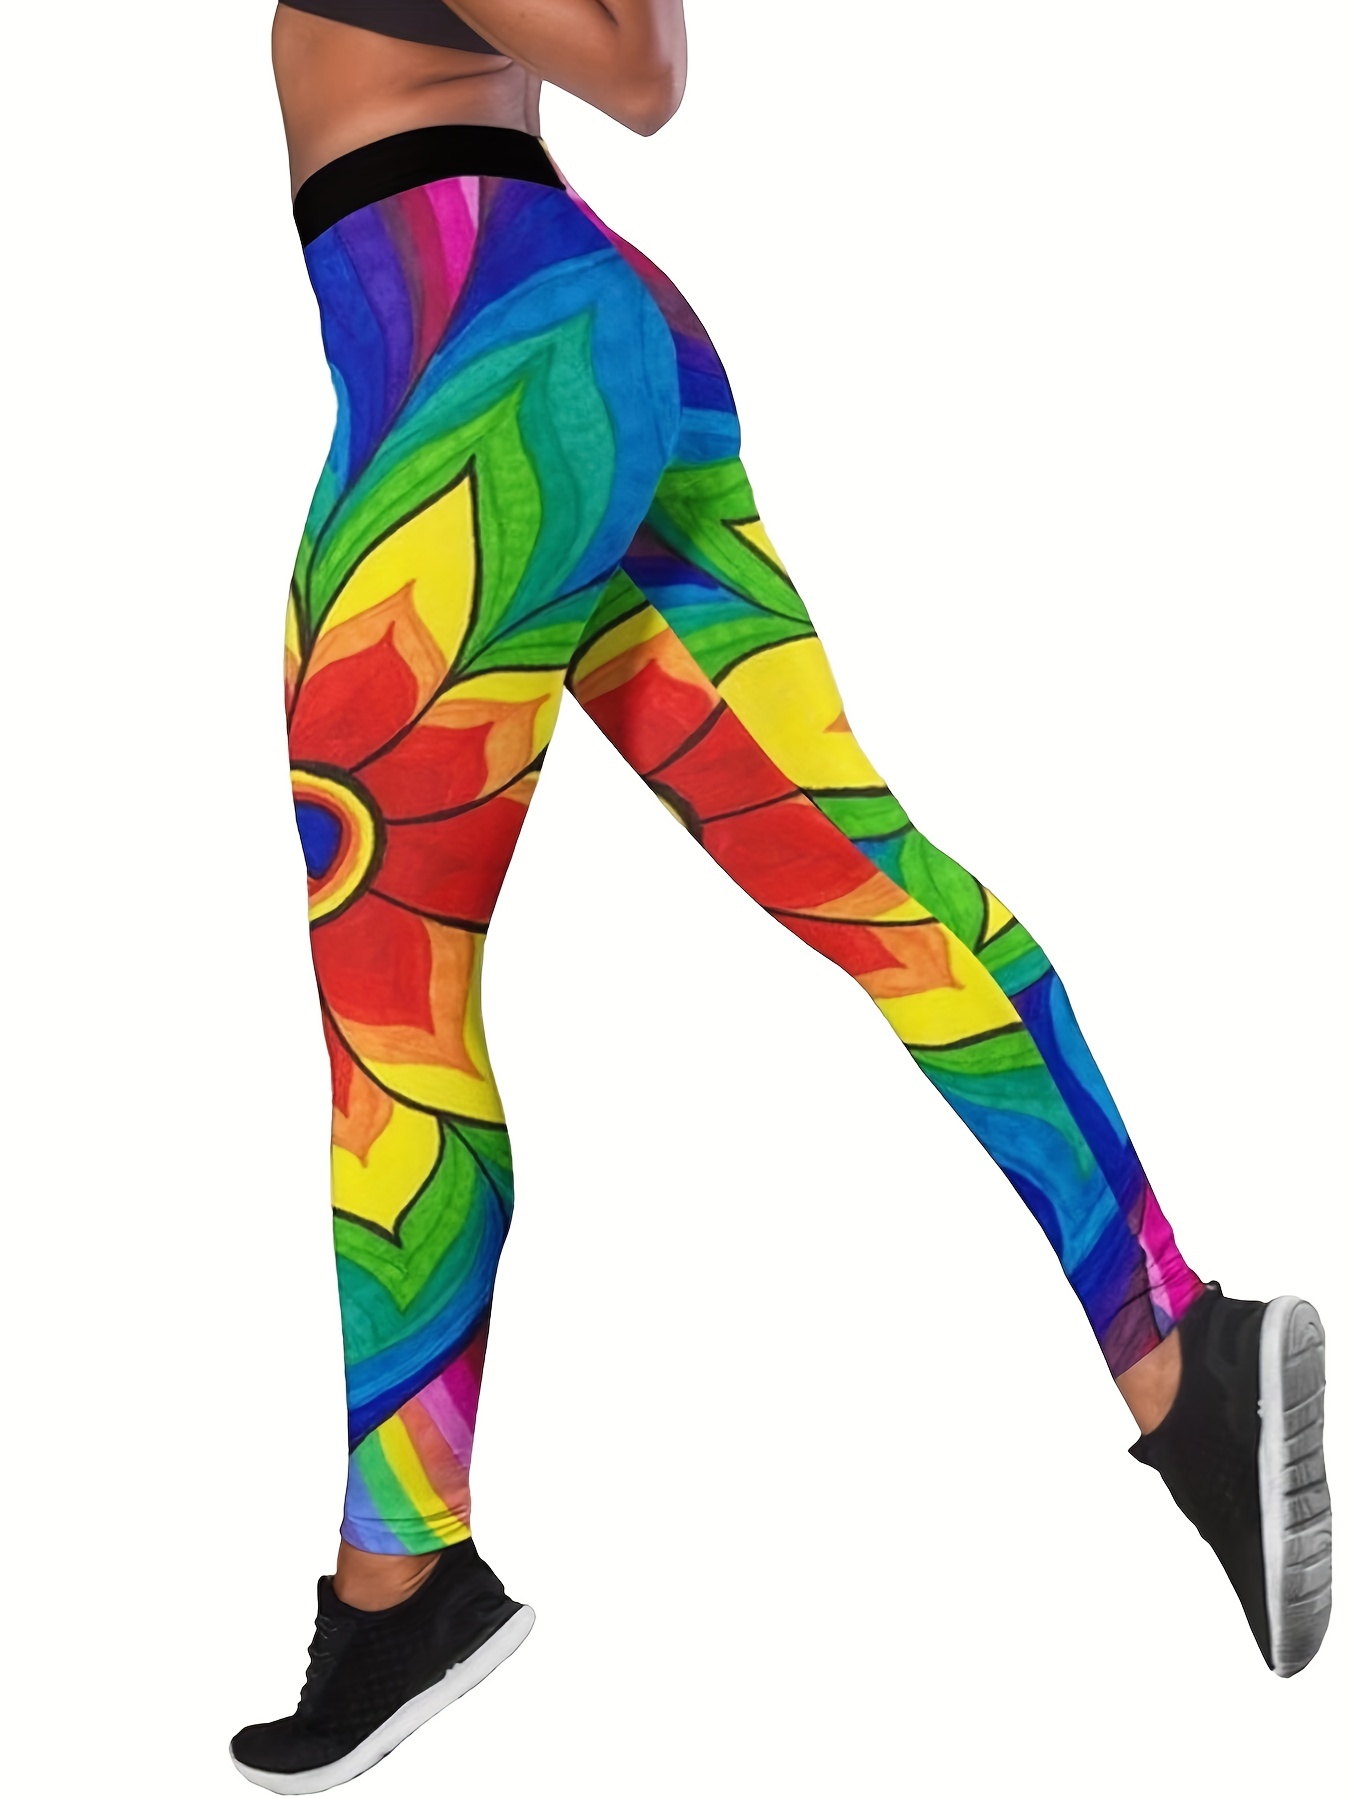 GYM RAINBOW Women's Workout Leggings with Pockets, High Waisted